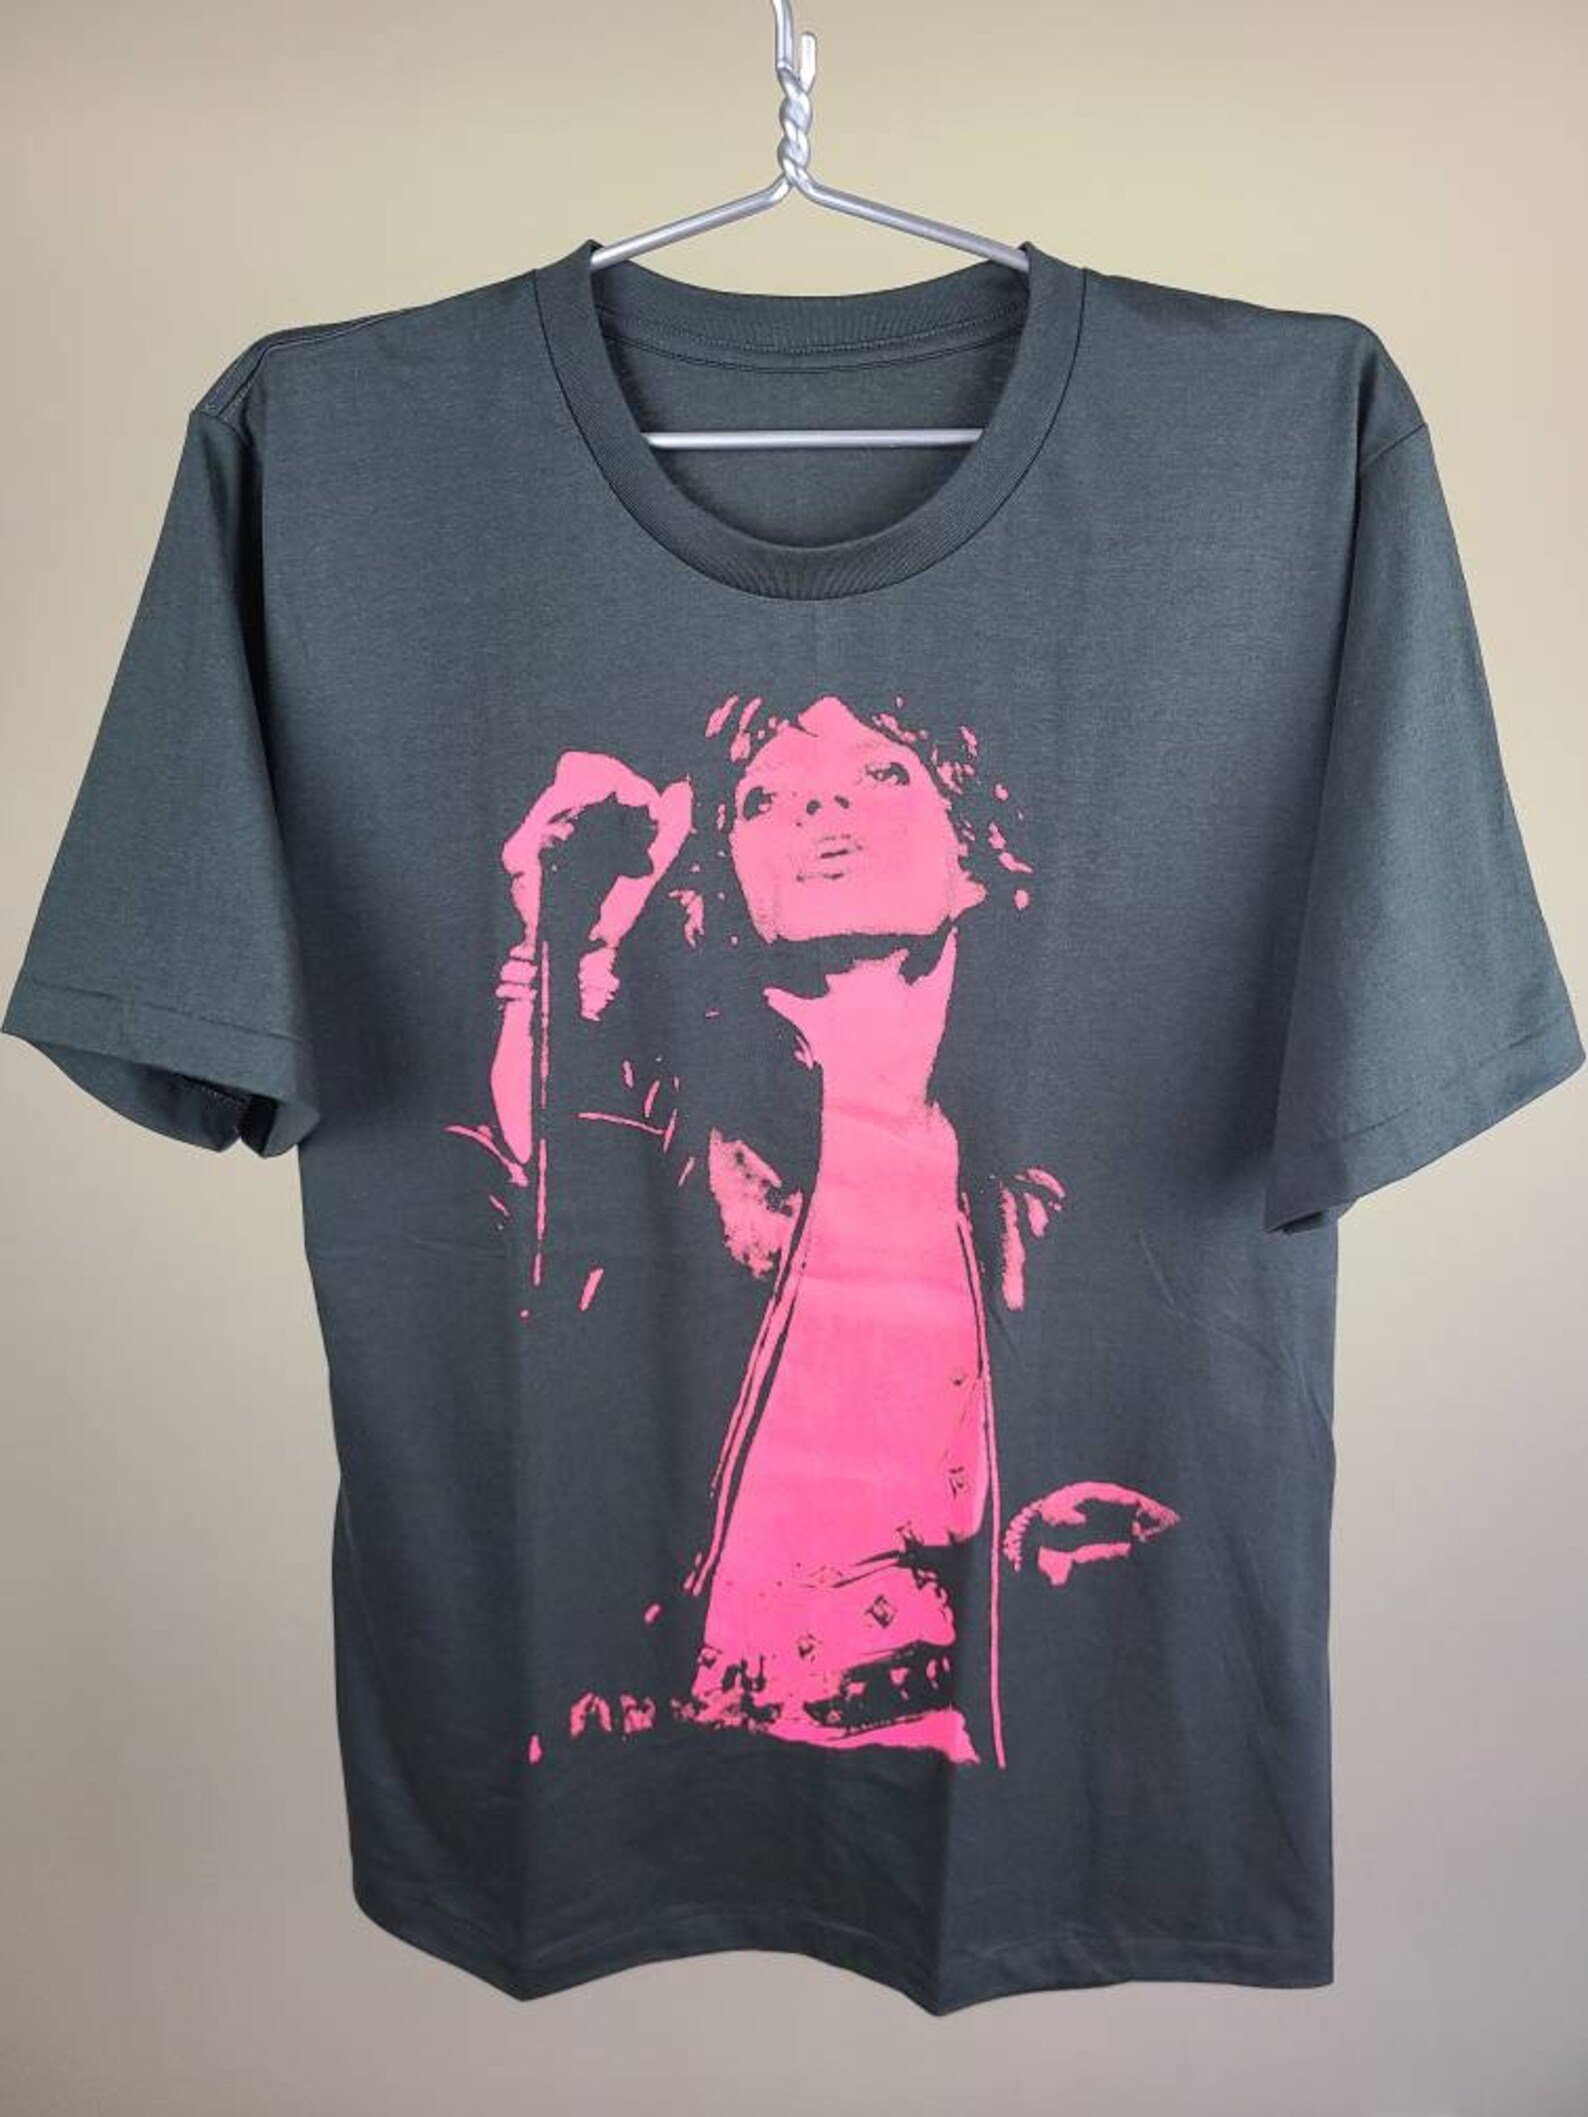 Rolling Stones Young Mick Jagger Pop Art Tee T Shirt Single | Etsy